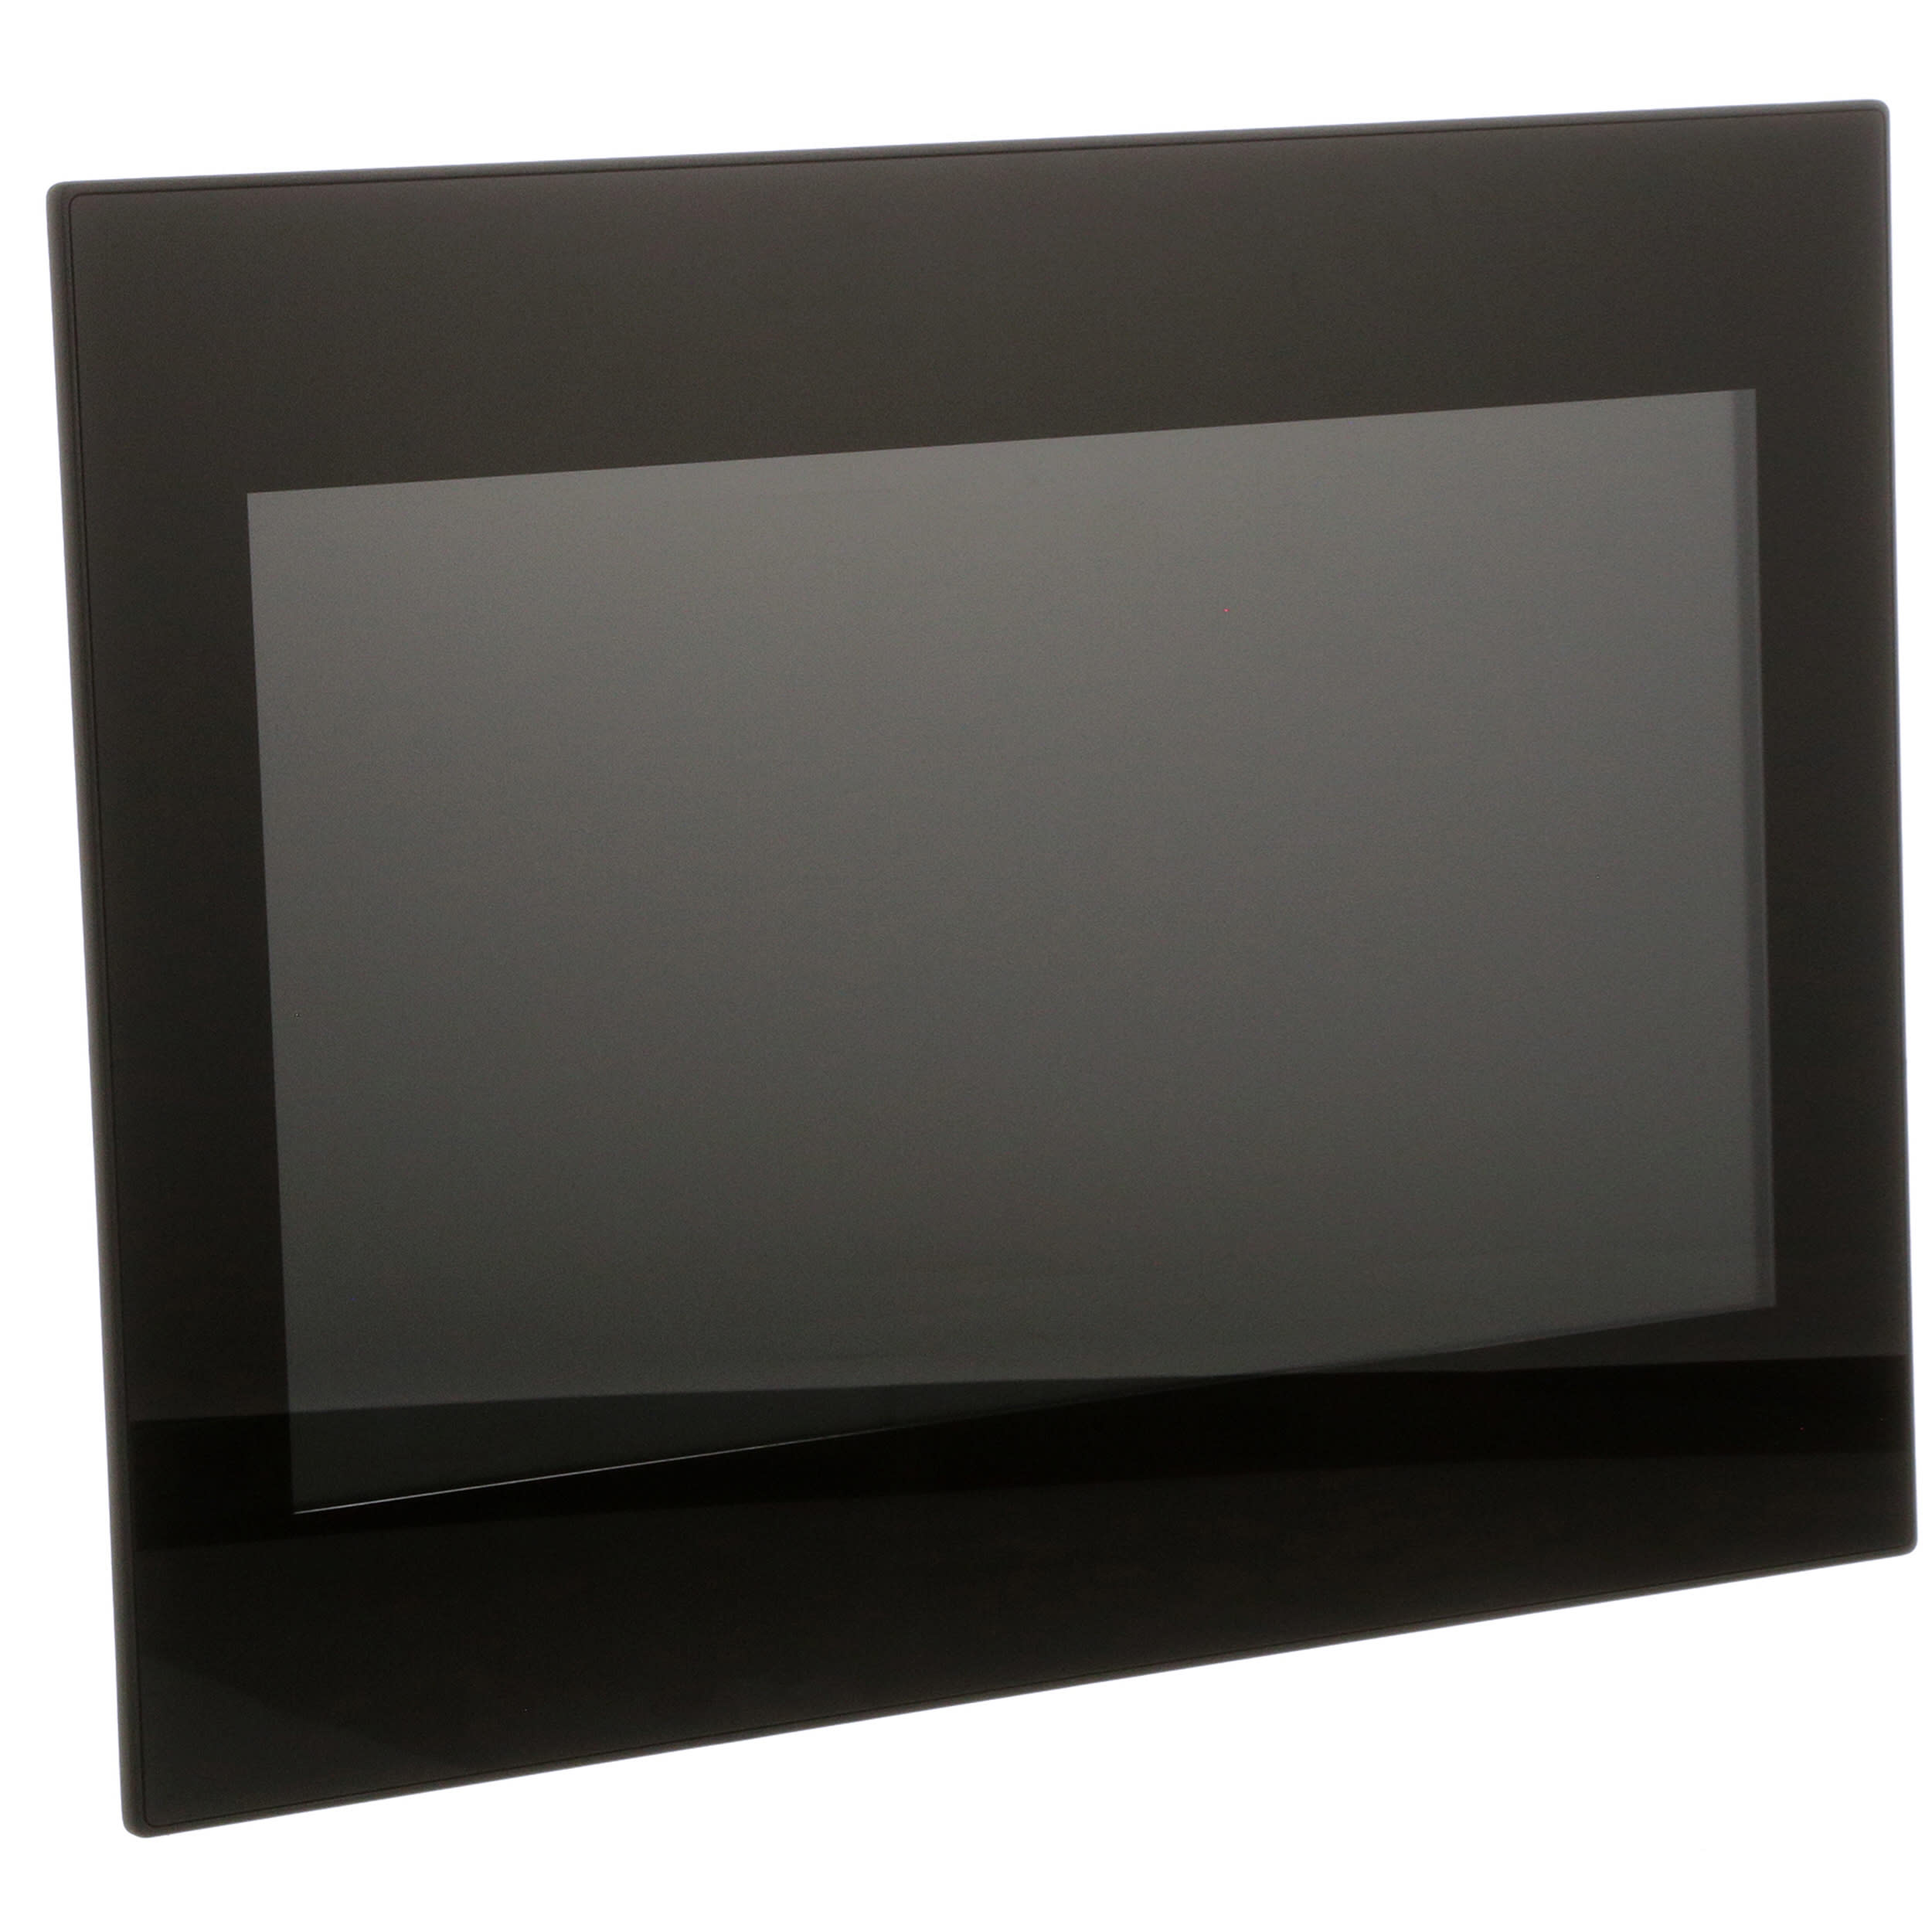 Phoenix Contact - 2402980 - Flat Panel LCD monitor, IP65, 15.6  Inch,Projective Capacitive Touch Screen - RS